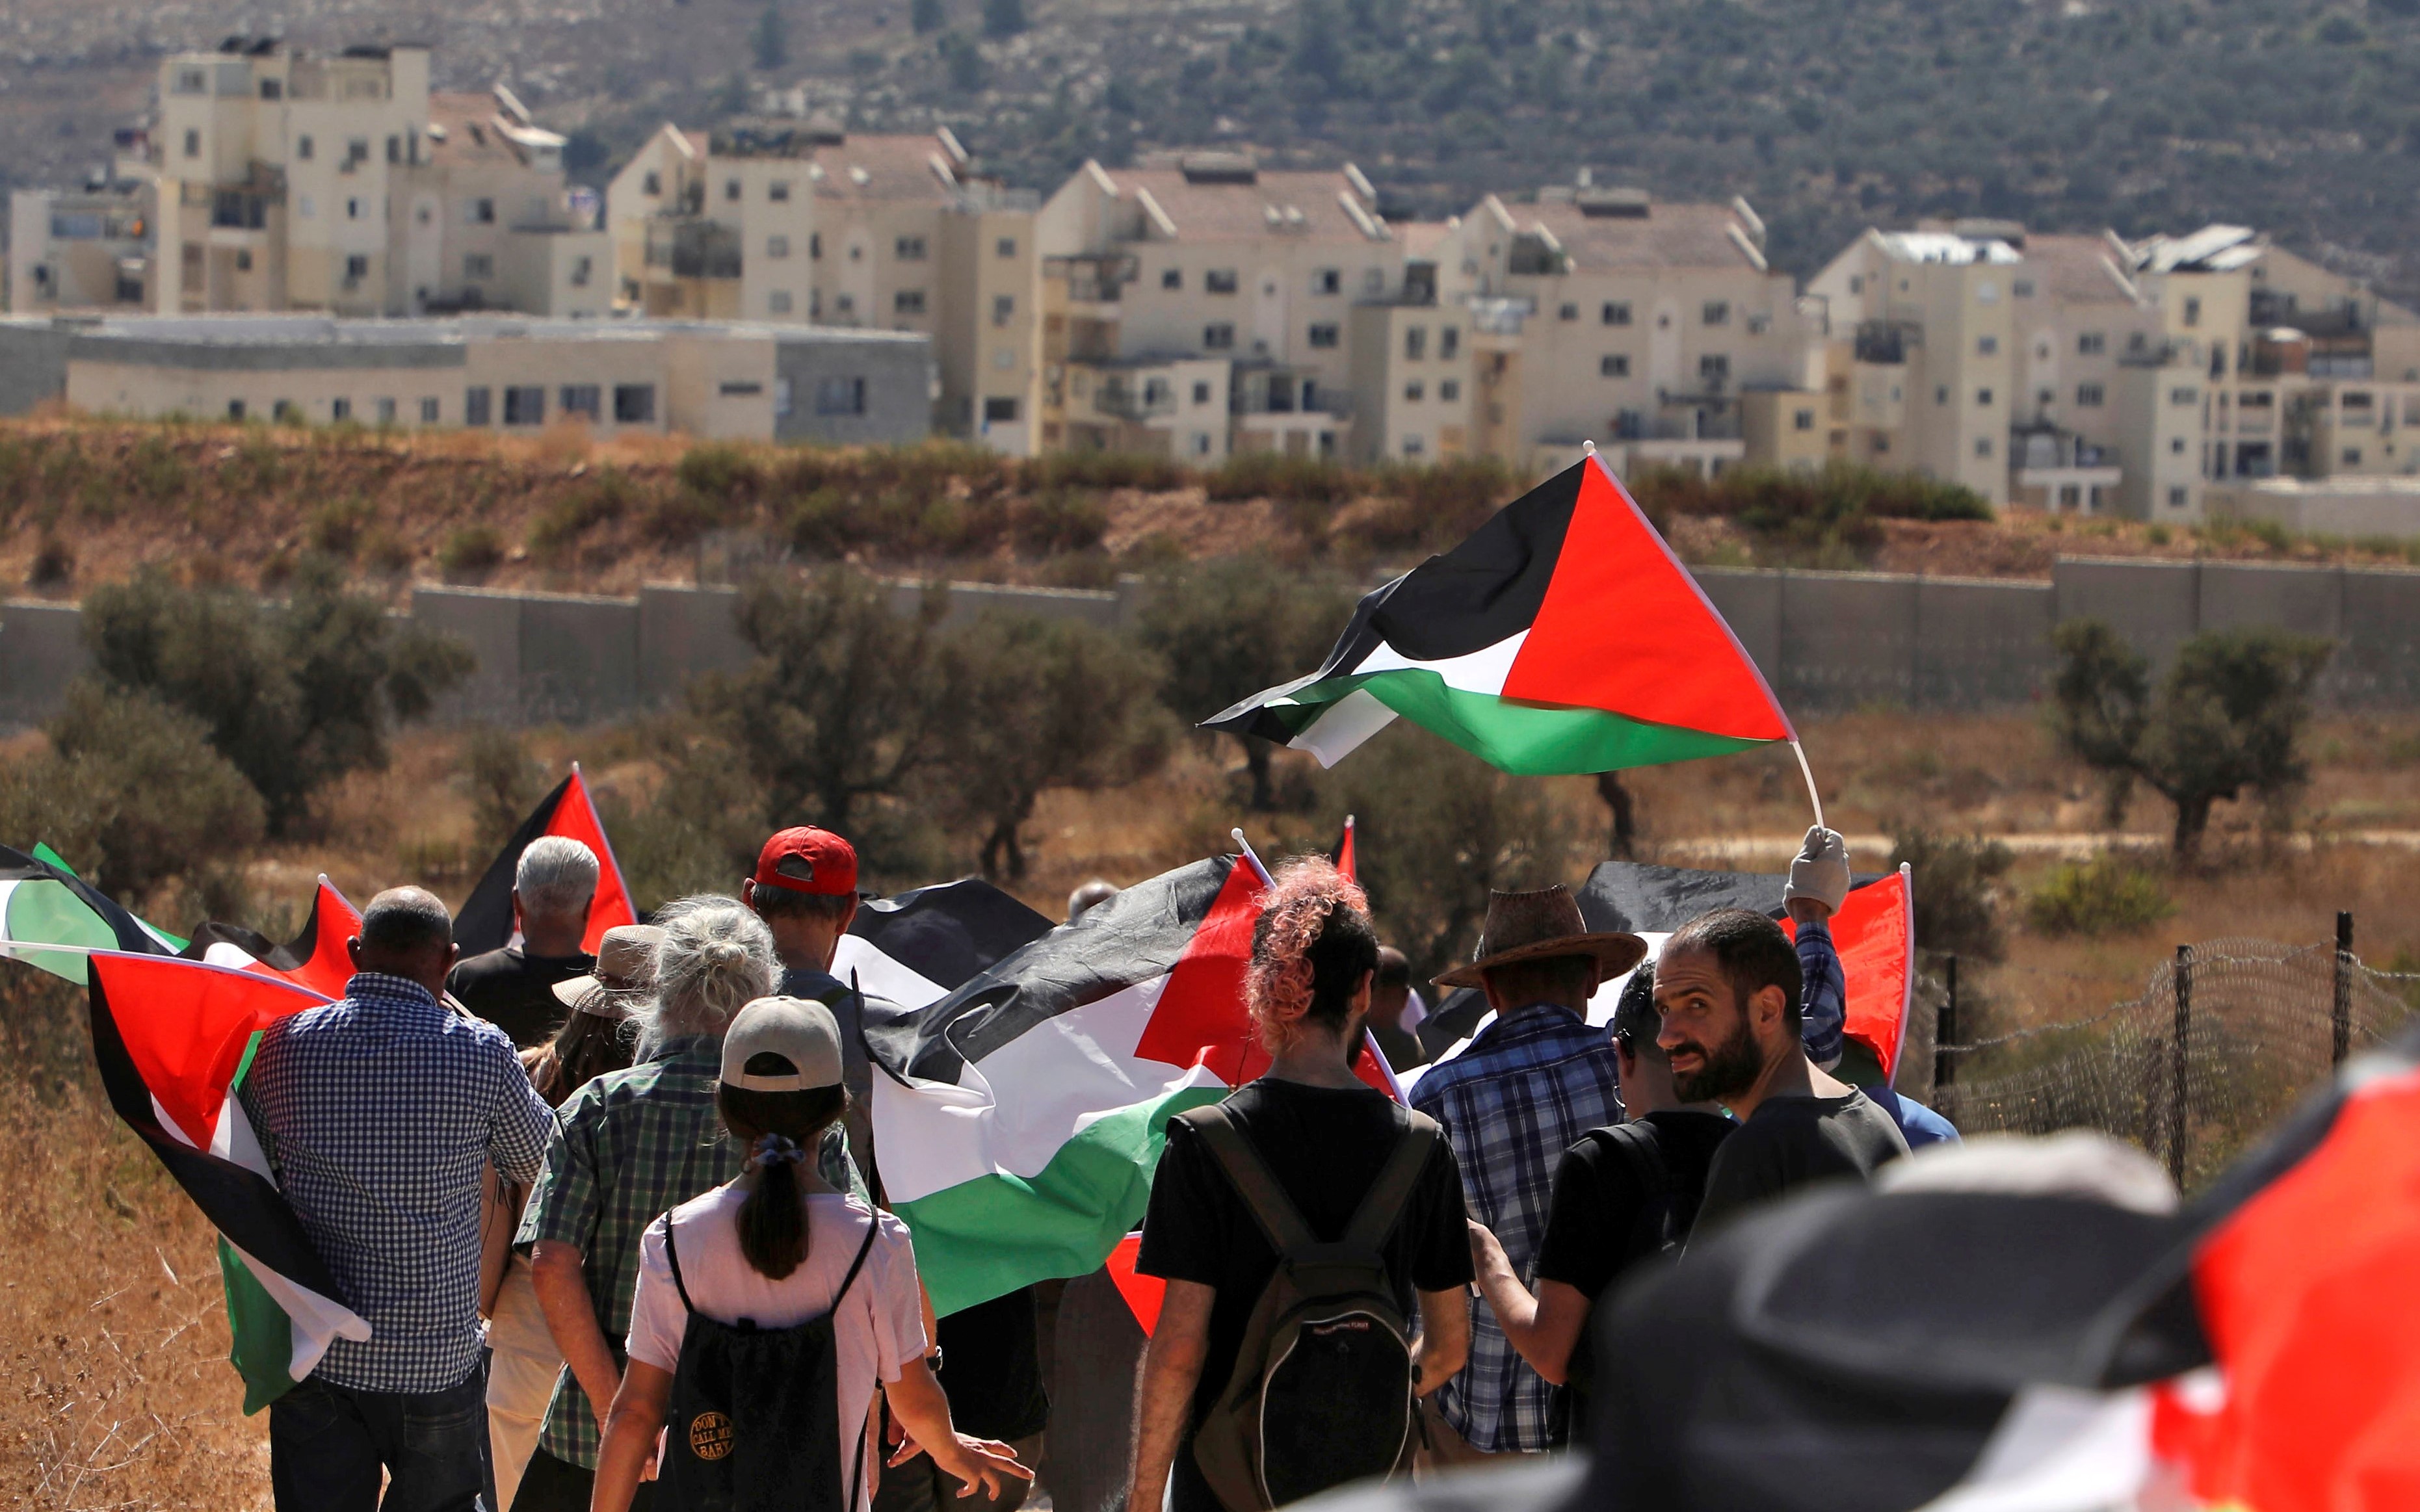  Palestinian and foreign demonstrators in Bilin opposite the settlements bloc of Modiin Illit (background) in the occupied West Bank on 4 October